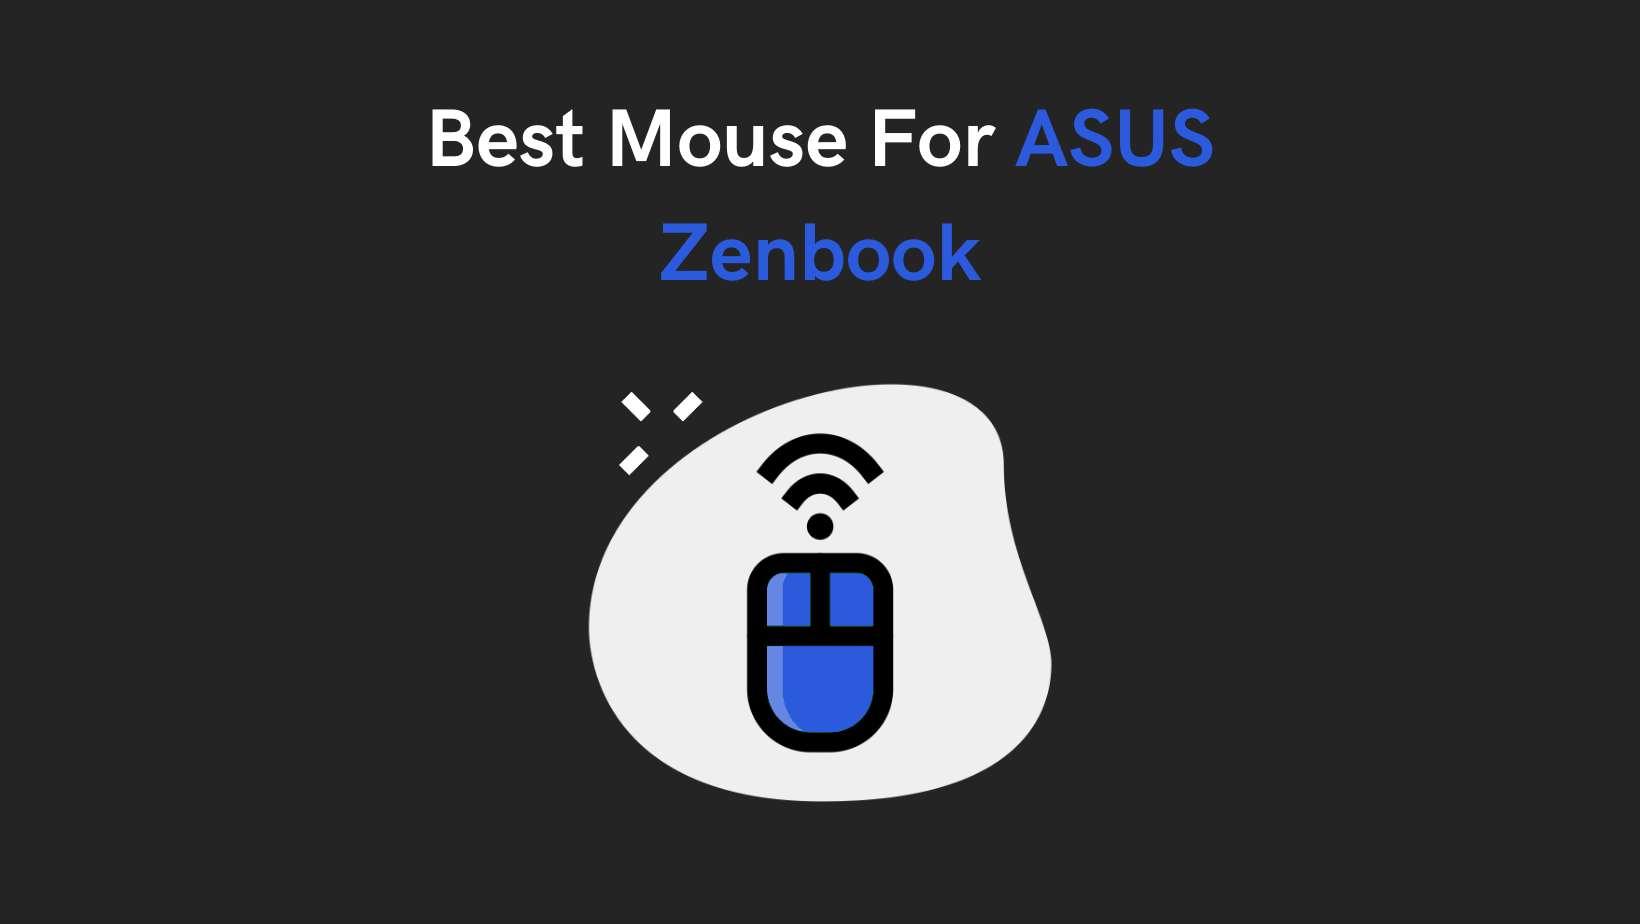 Best Mouse For ASUS Zenbook